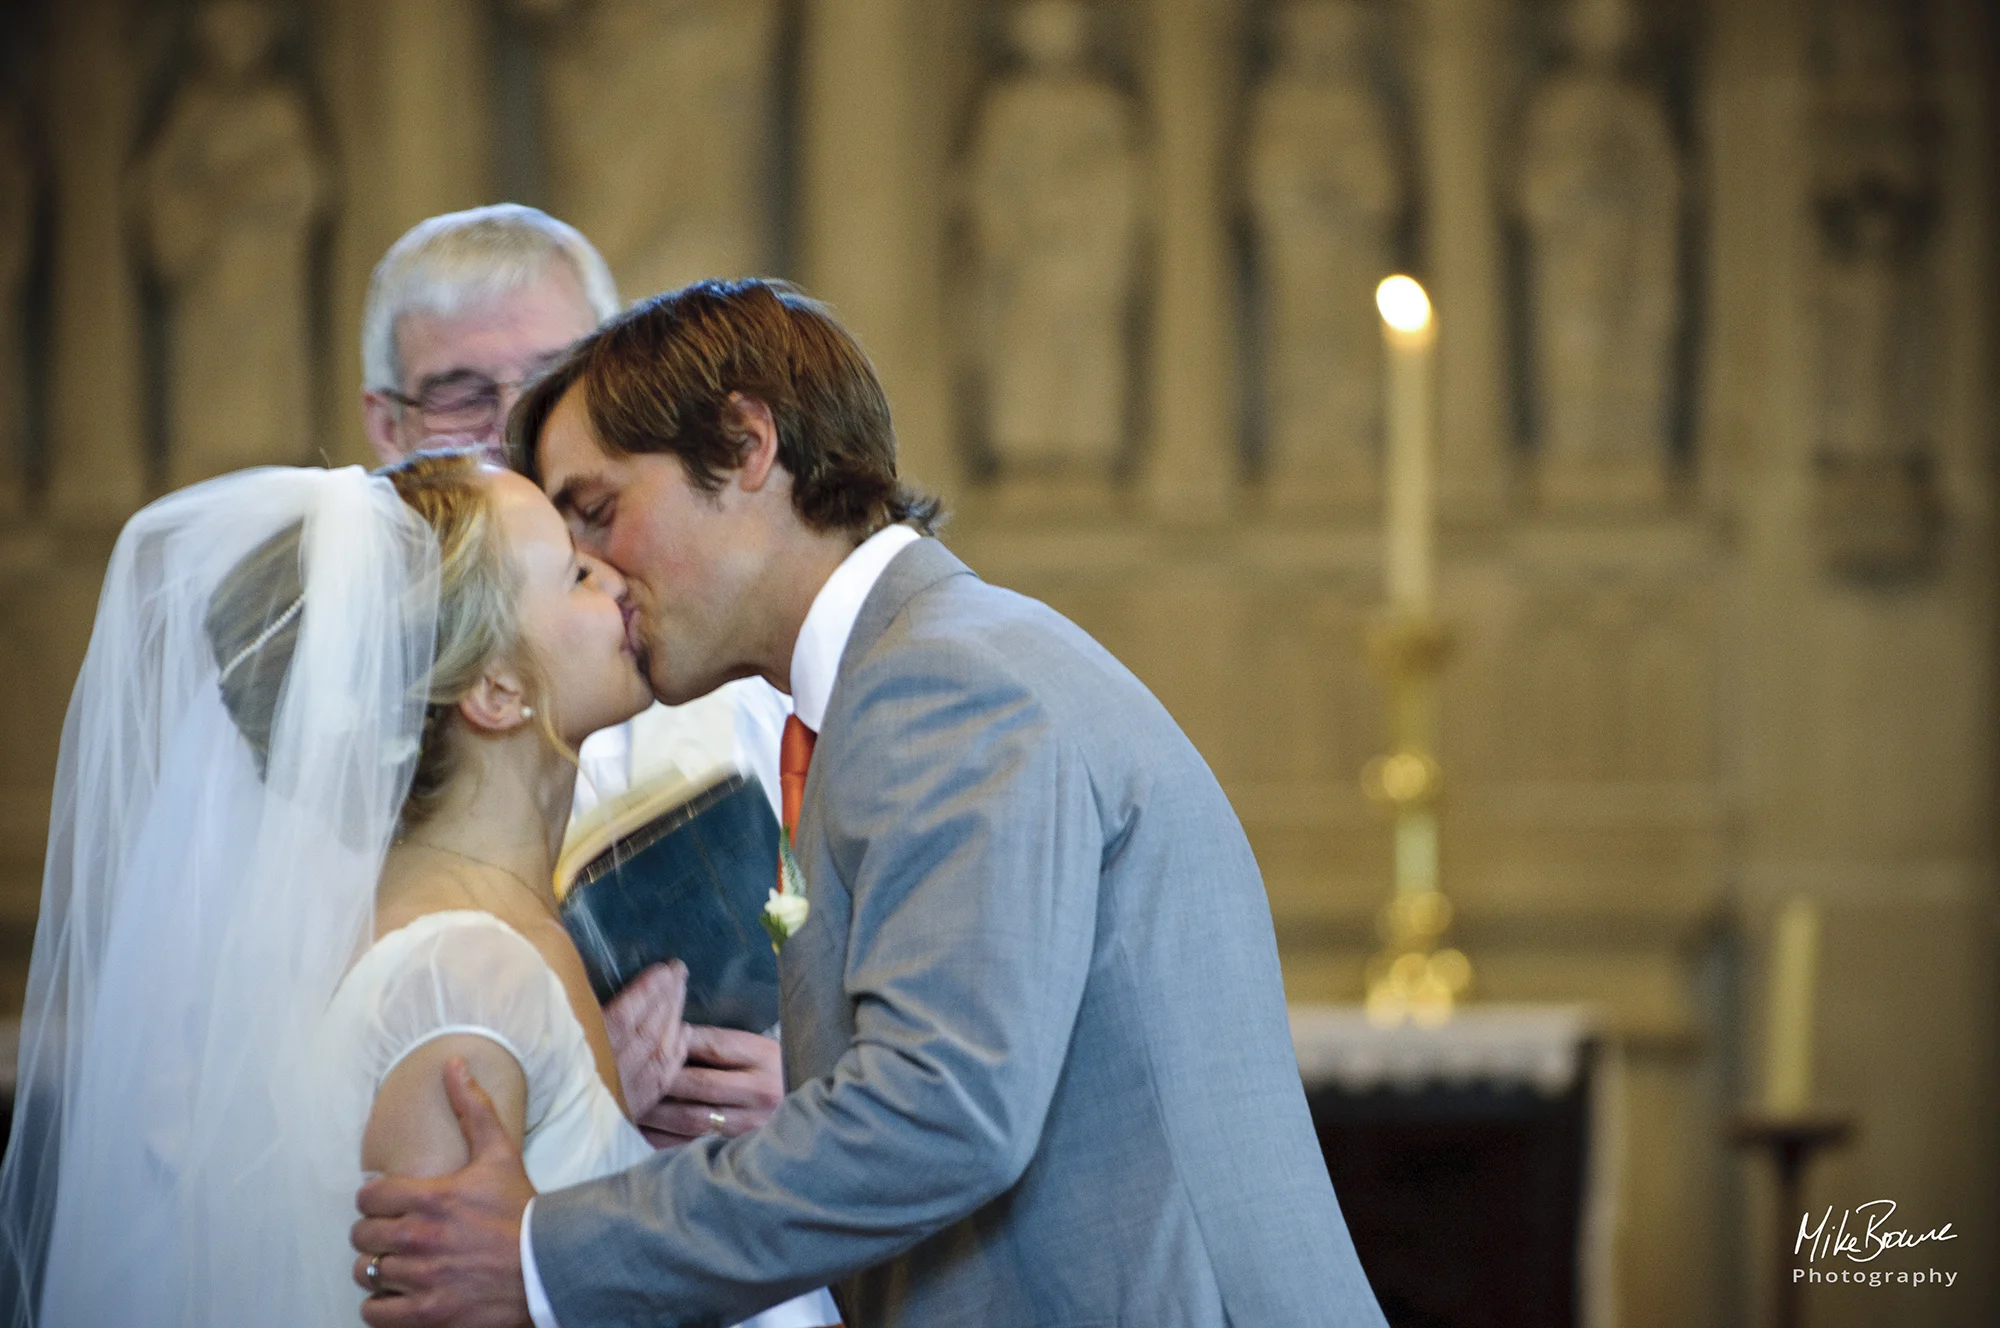 Newly married couple kiss during the service